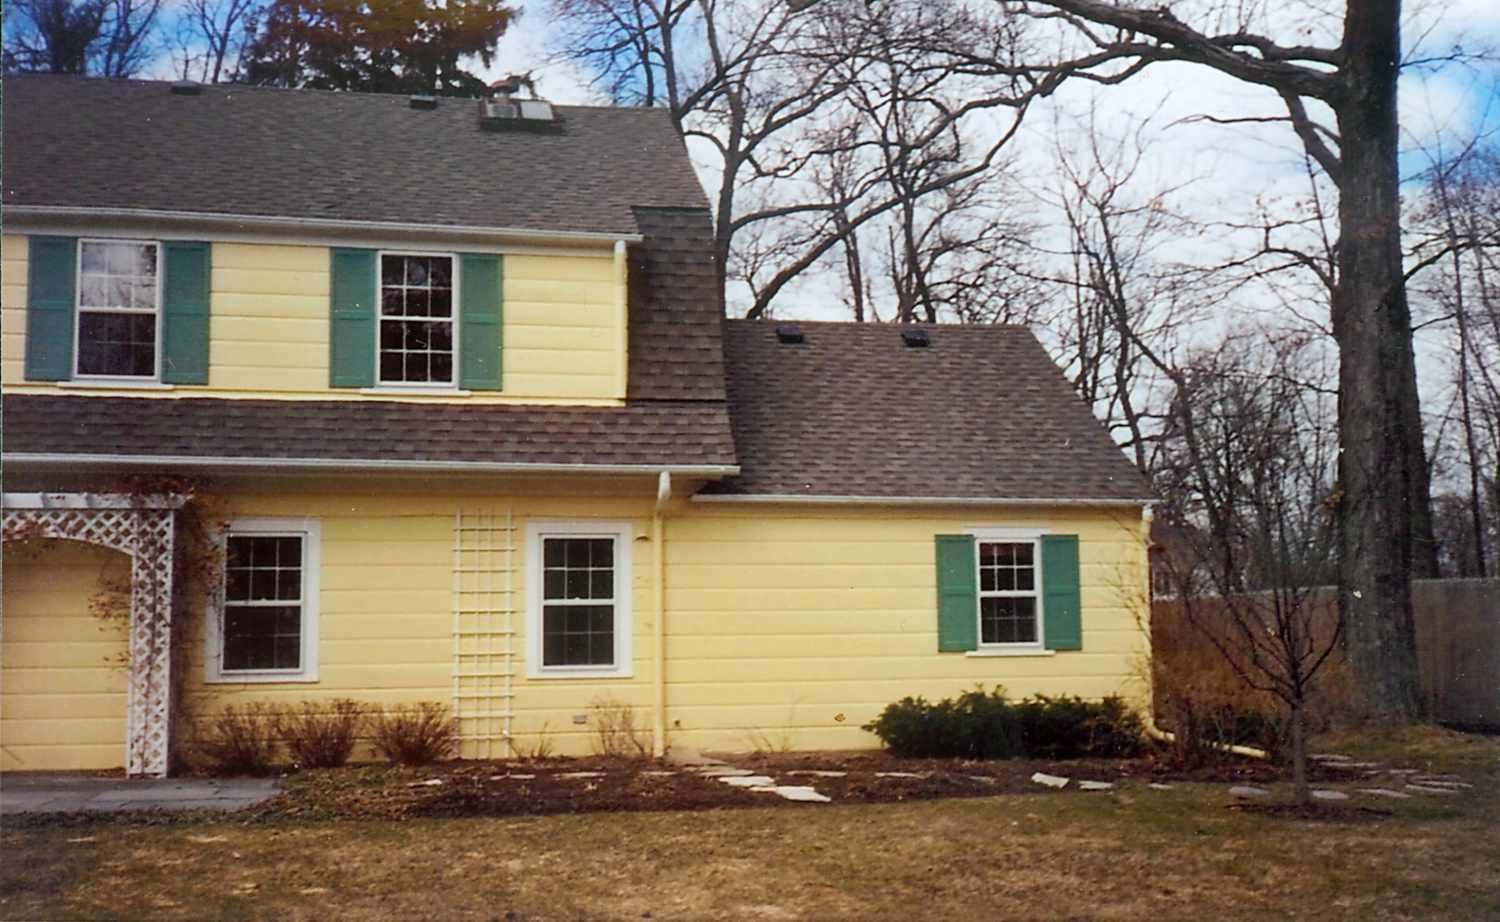 Before photo Yellow Grand Colonial Manor with green shutters